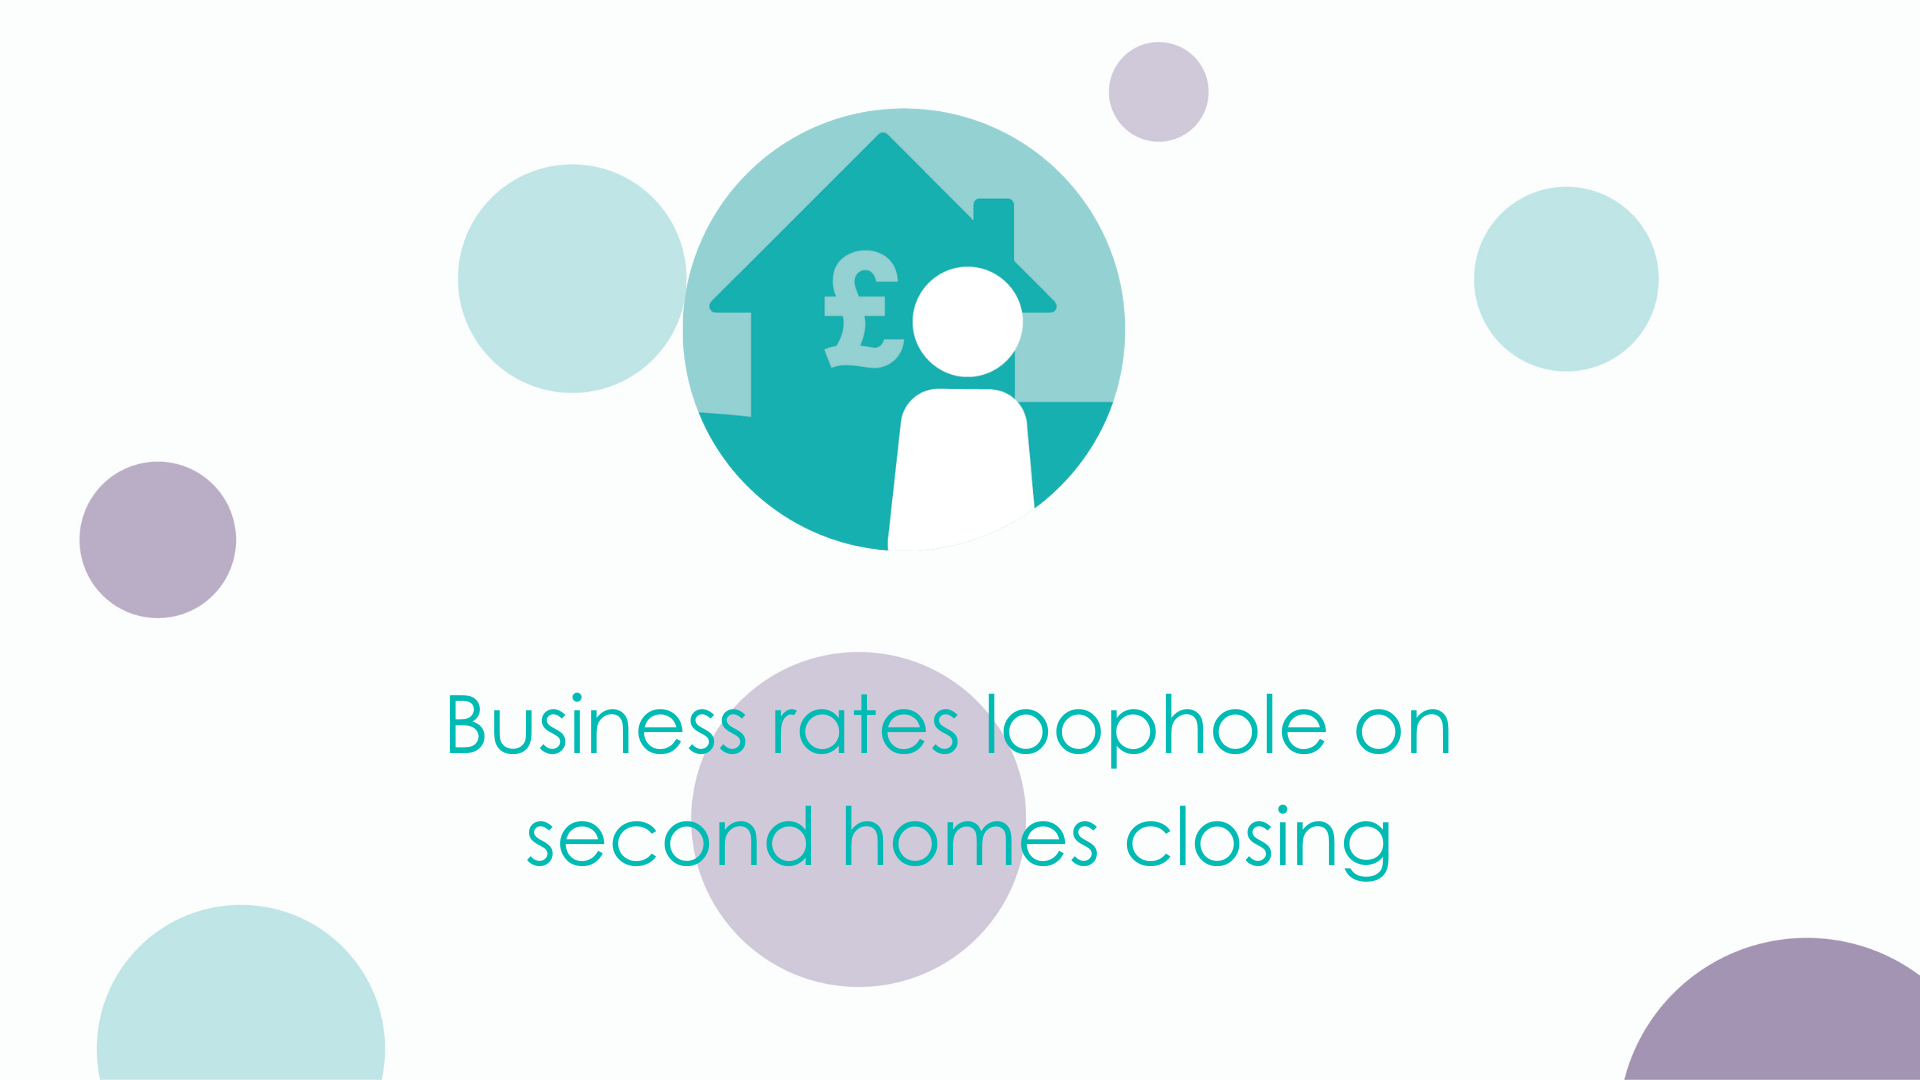 Business rates loophole on second homes closing